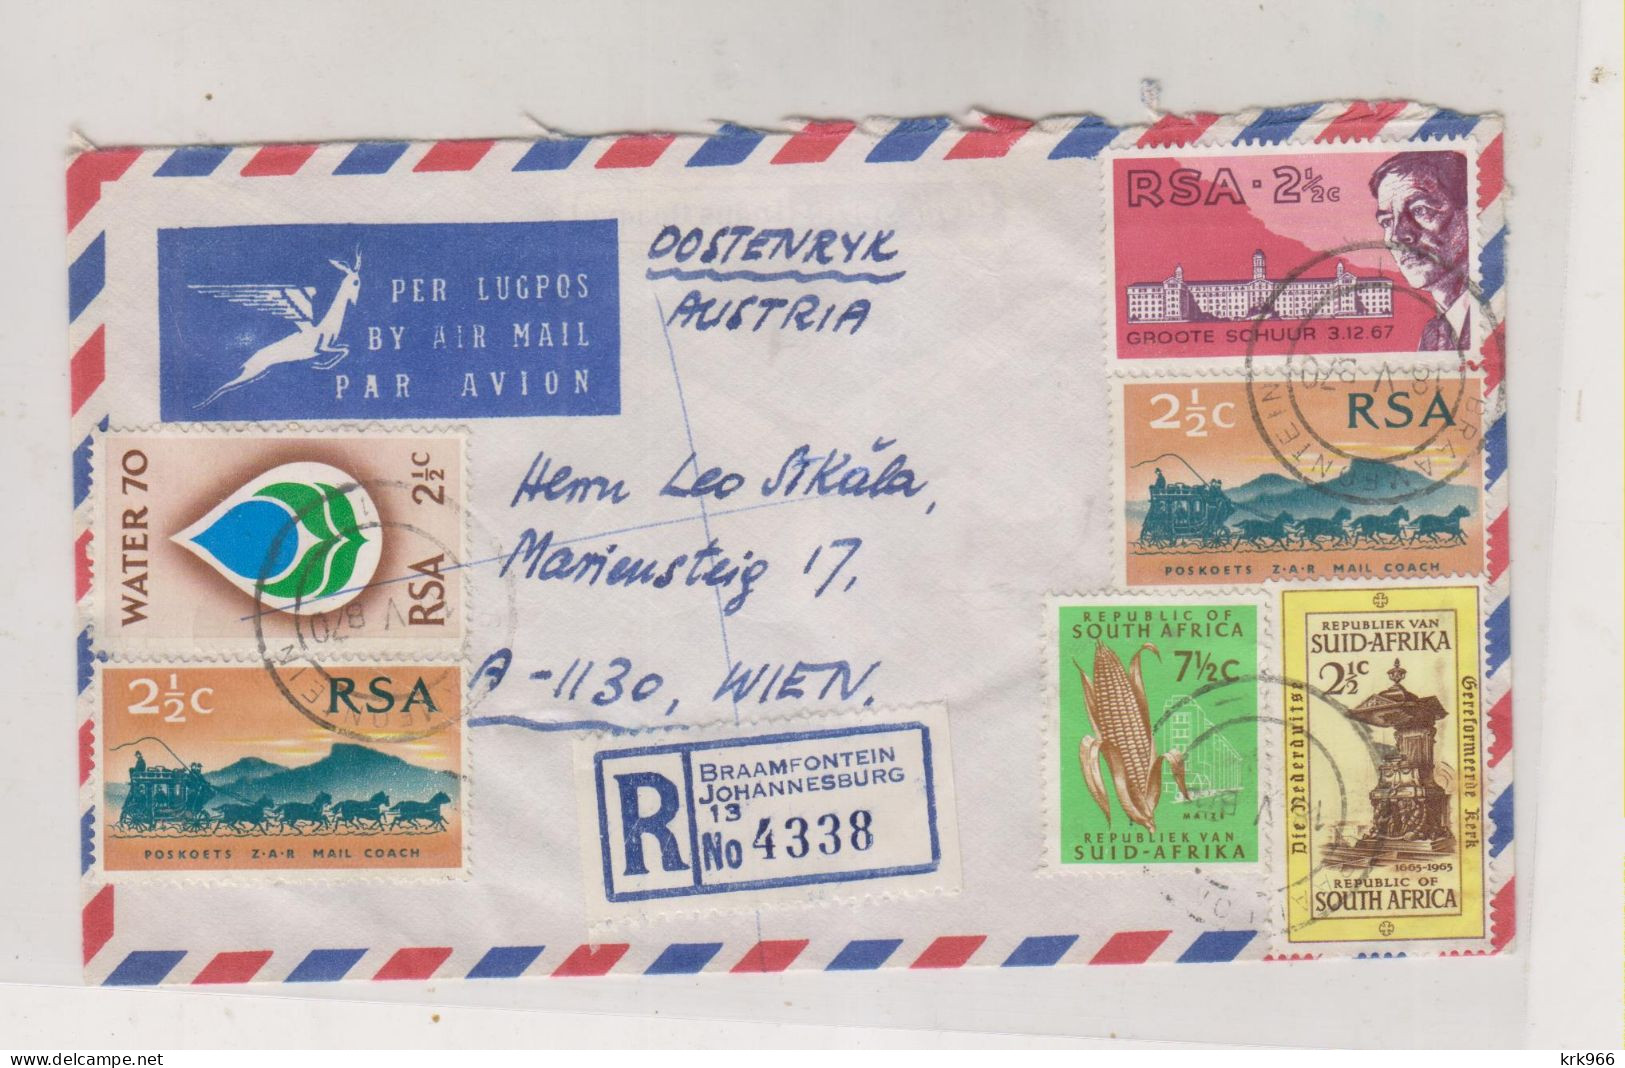 SOUTH AFRICA  BRAAMFONTEIN JOHANNESBURG  1970 Nice Registered Airmail Cover To Austria - Covers & Documents